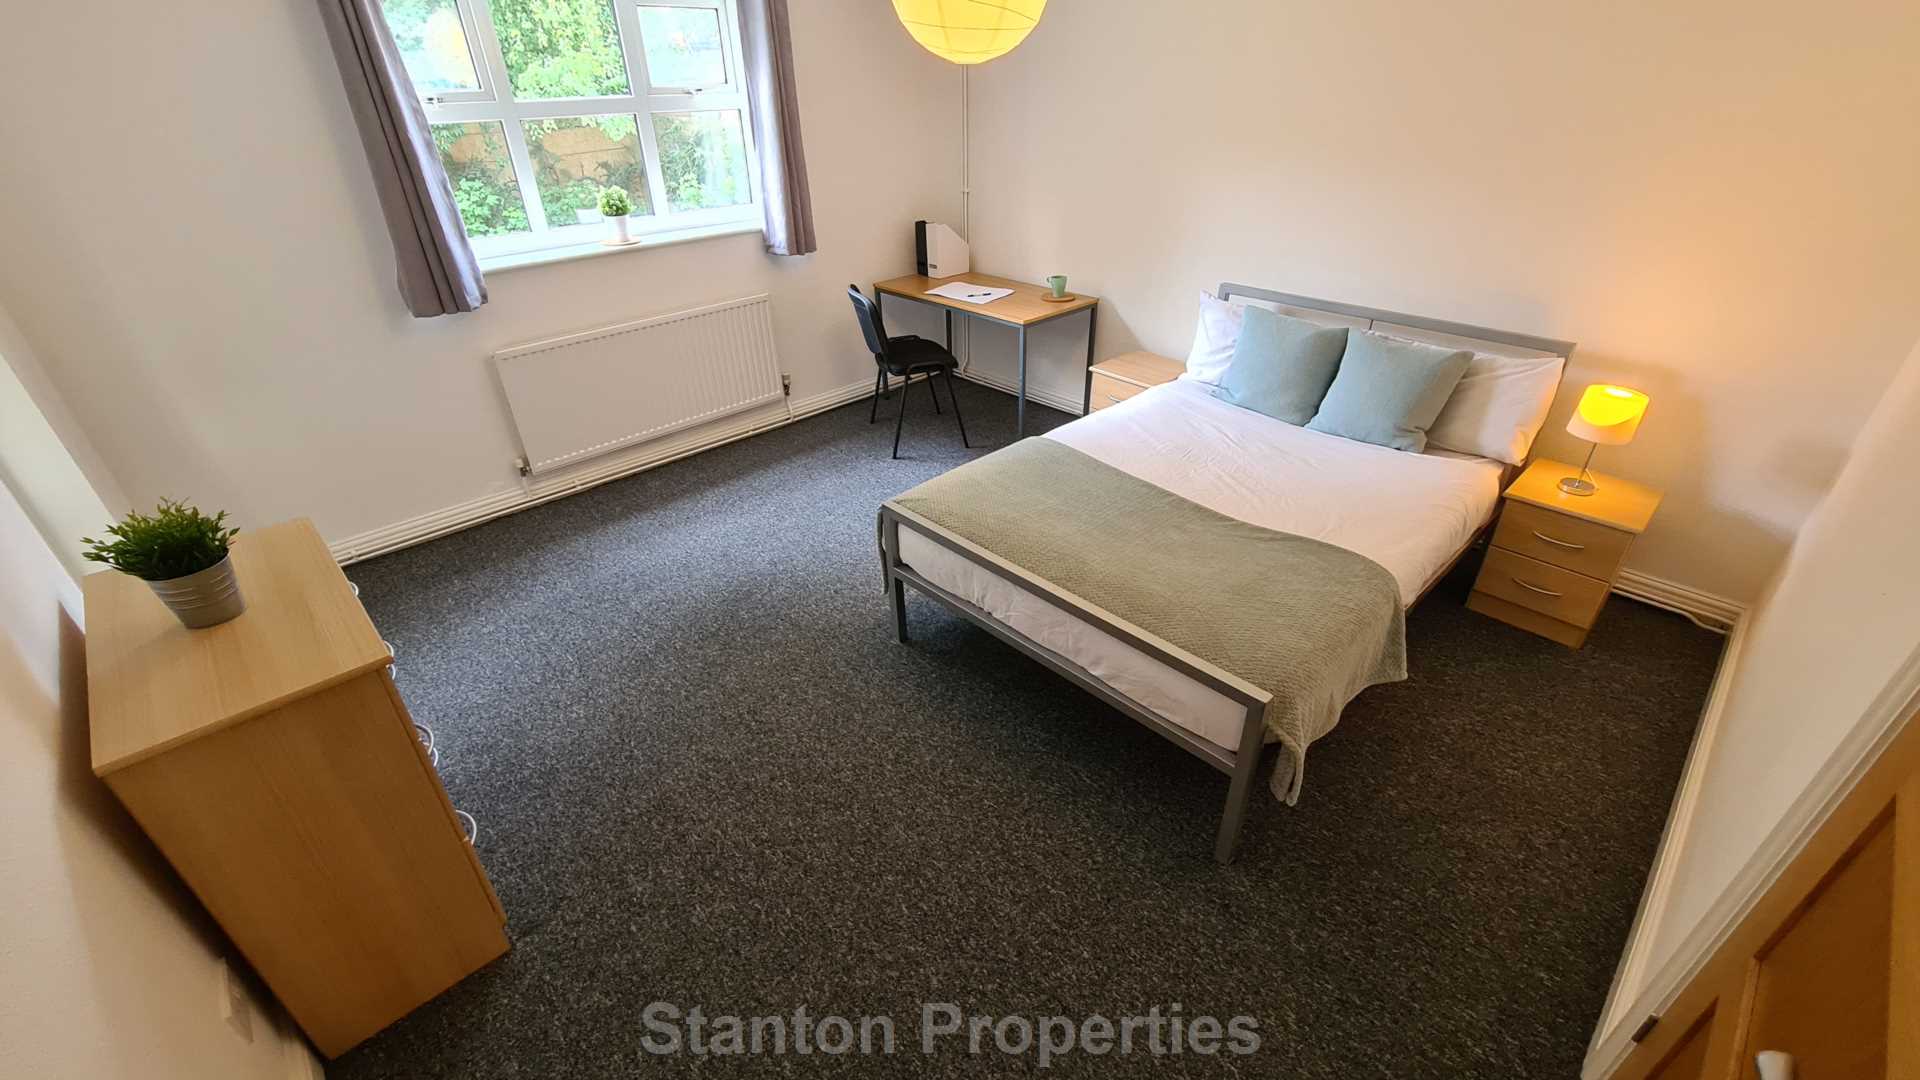 £155 pppw, See Video Tour, Granville Road, Fallowfield, Image 21